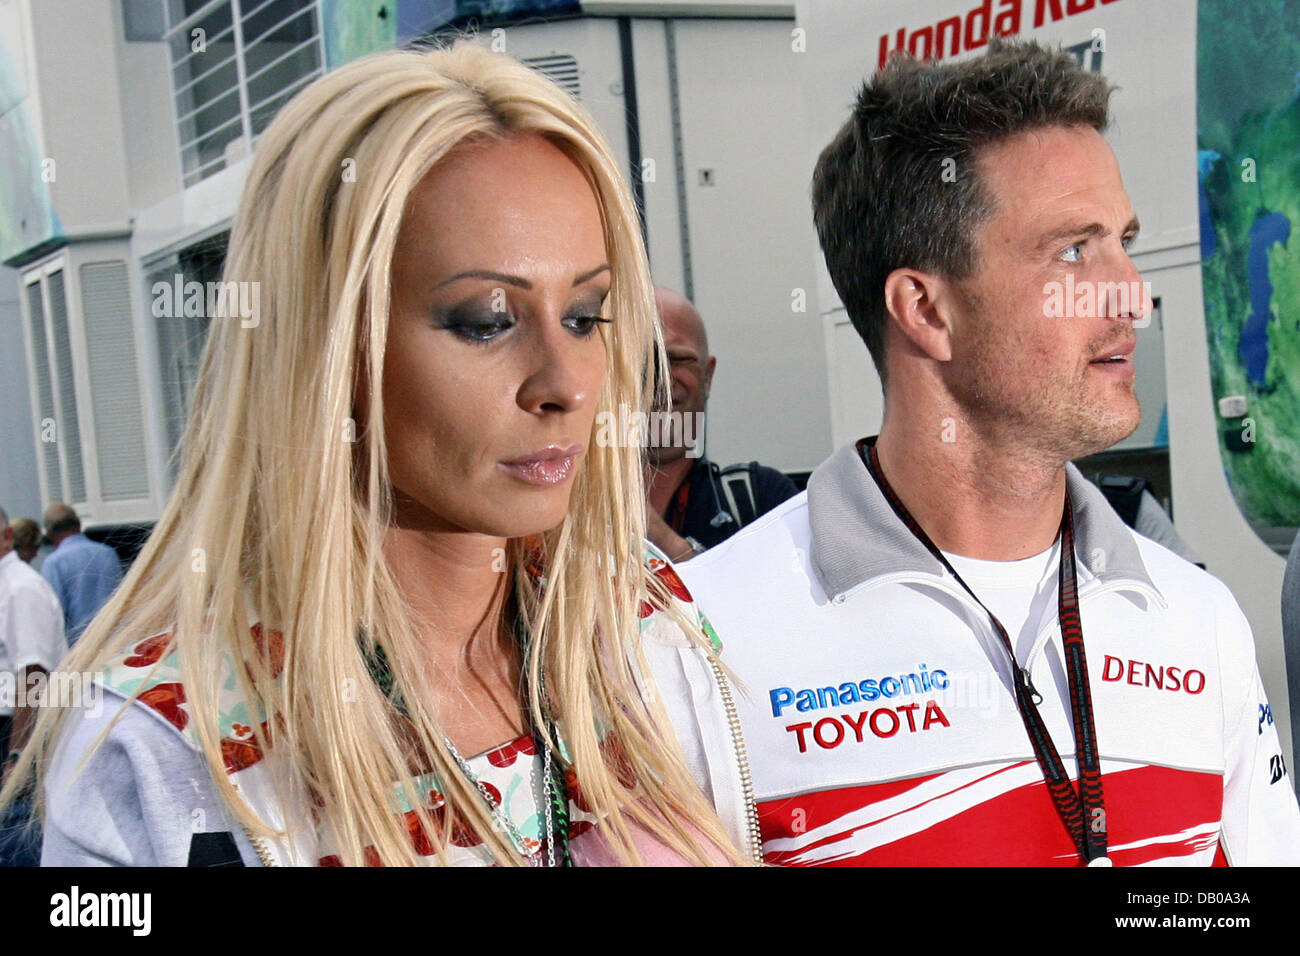 German Formula pilot Ralf Schumacher of Toyota and his wife Cora are pictured at Nurburgring circuit in Nurburg, Germany, 21 July 2007. The Formula One Grand Prix of Europe took place on 22 July. Photo: Jens Buettner Stock Photo